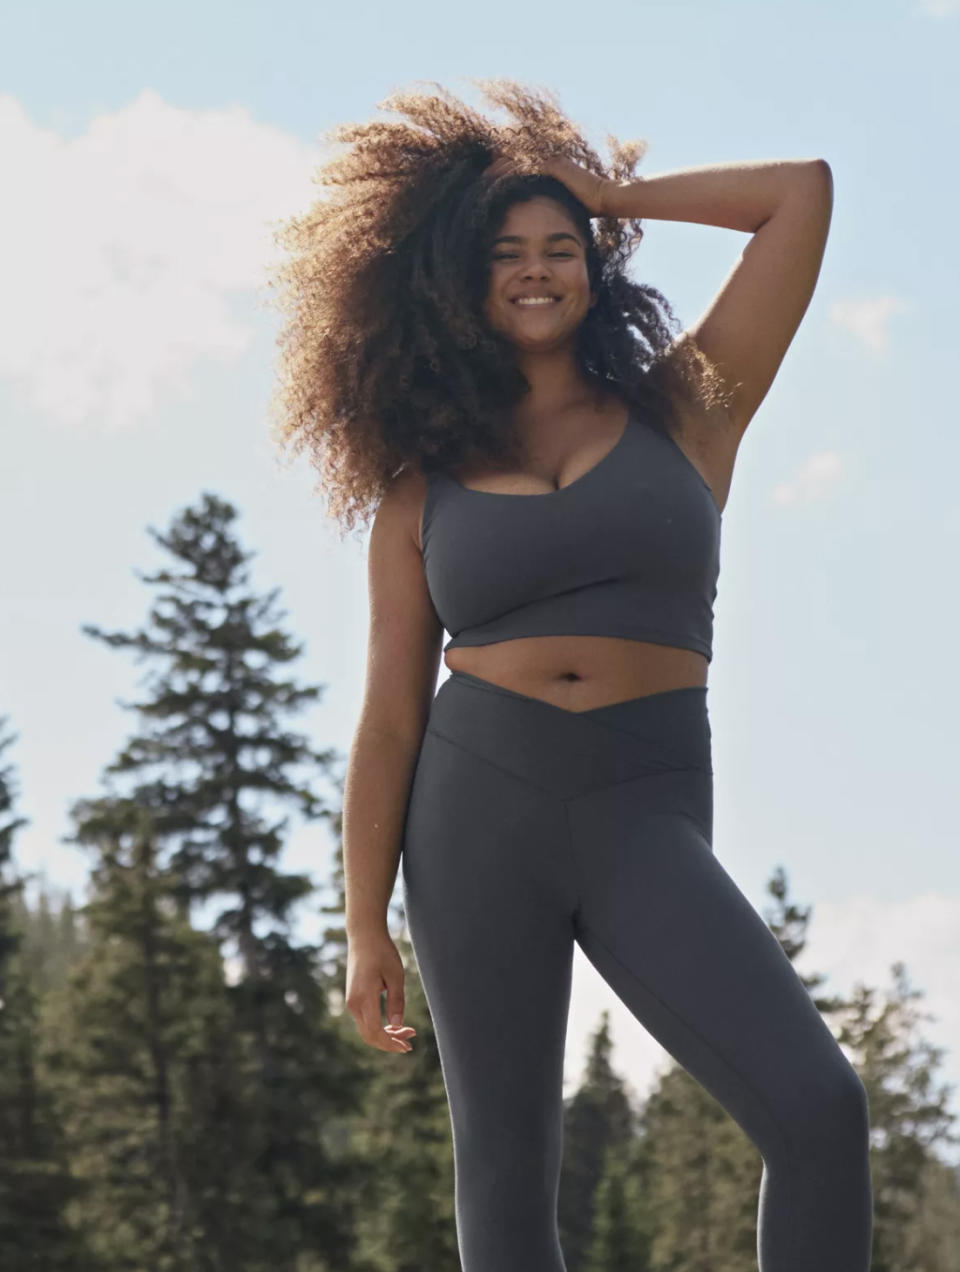 Model posing outside with hip popped wearing grey sports bra with matching crossover leggings